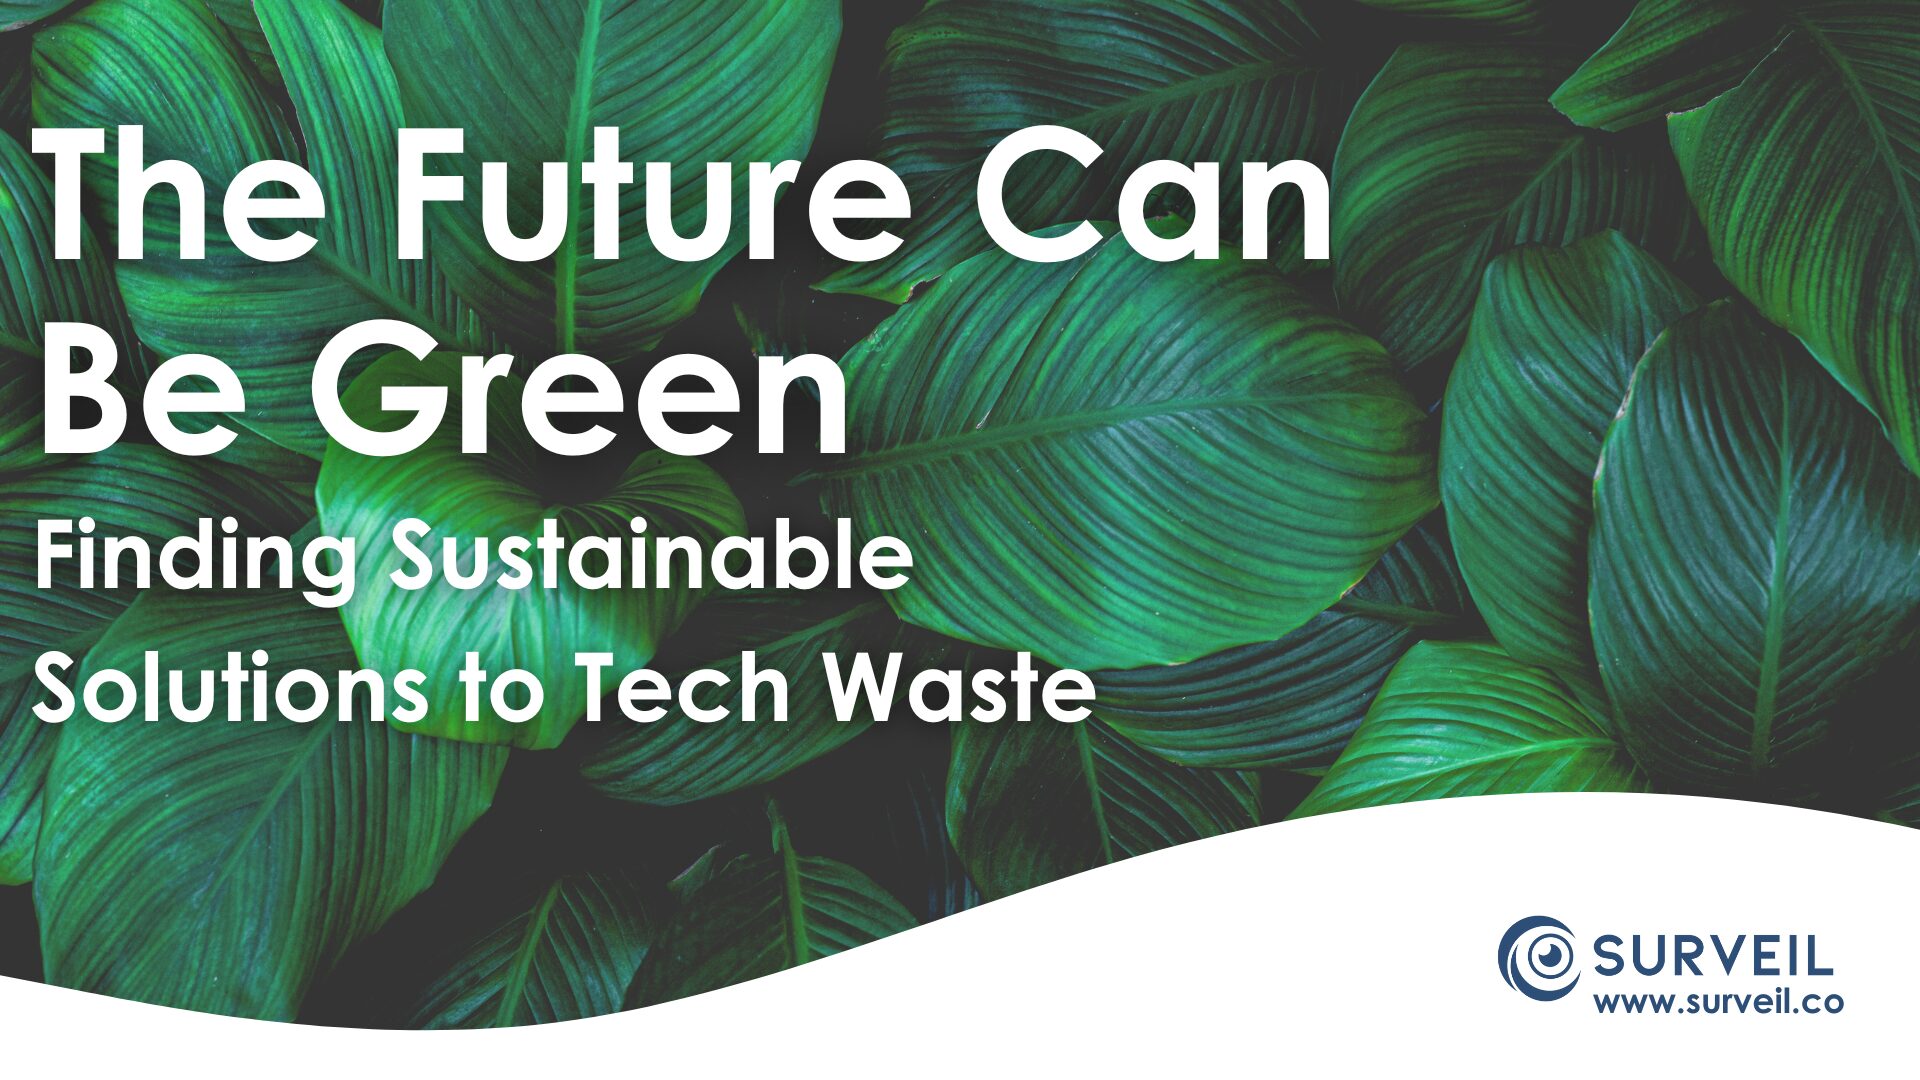 The Future Can Be Green: Finding Sustainable Solutions to Tech Waste